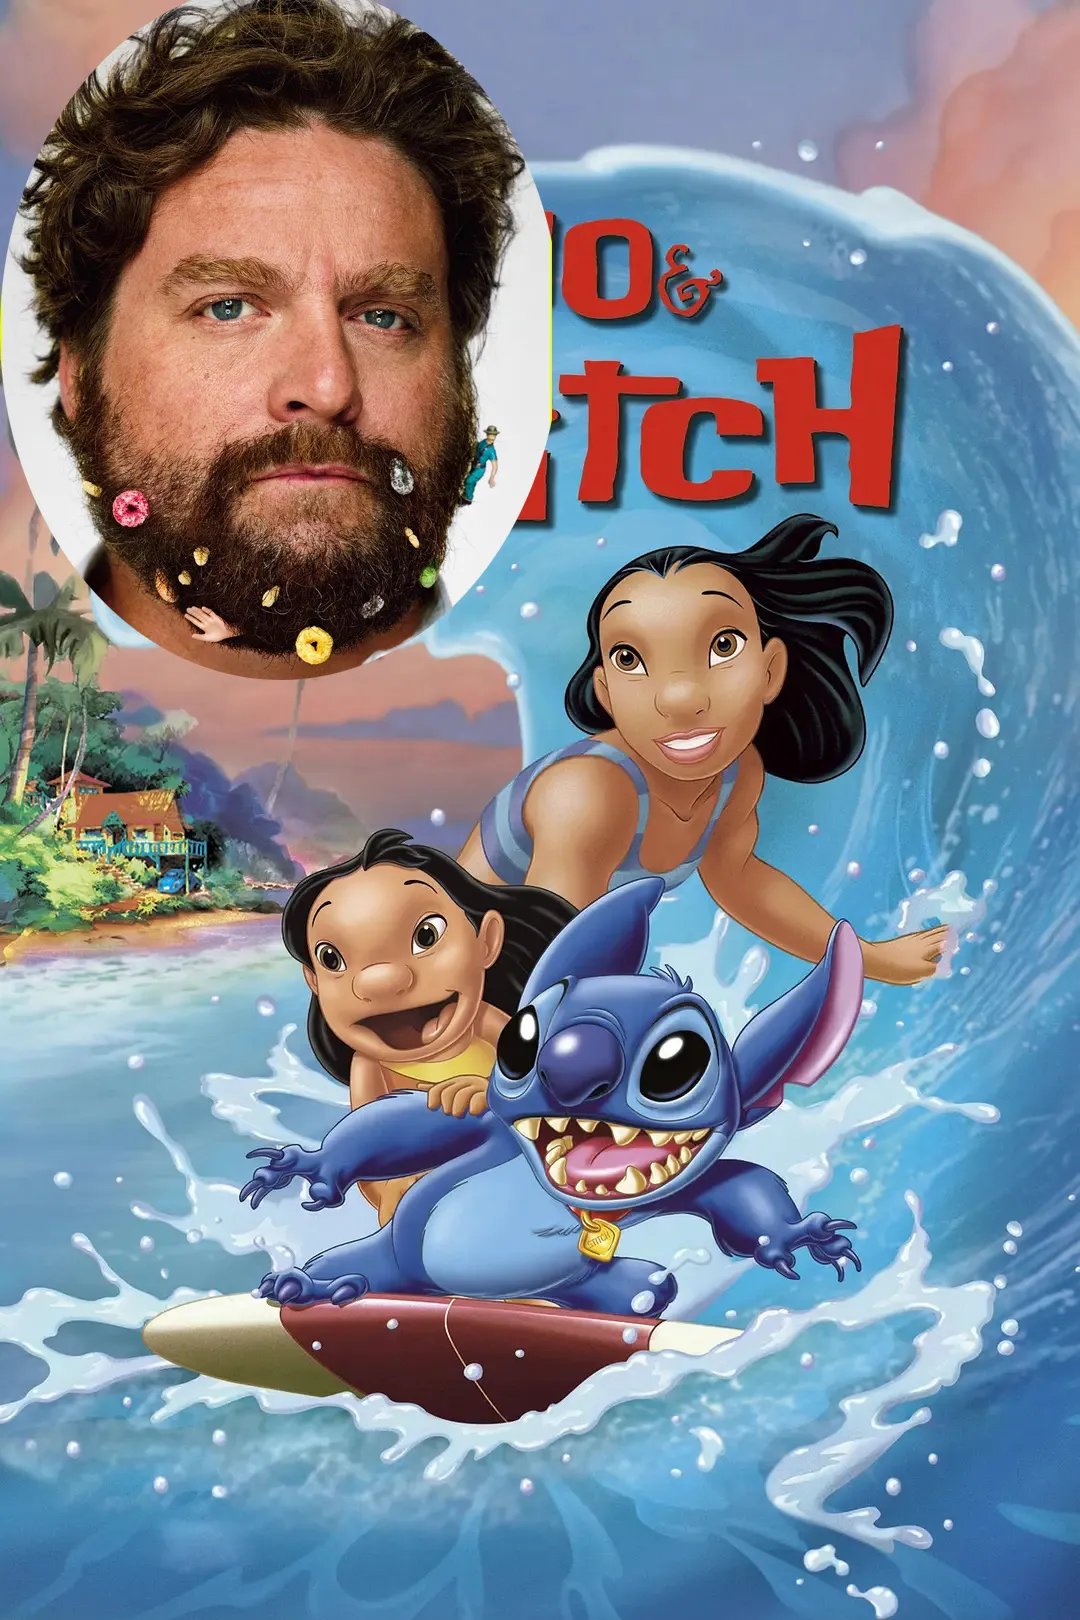 'The Hangover‎' Star Zach Galifianakis Joins Live-Action 'Lilo & Stitch‎', Actress Lilo Still in Casting | FMV6